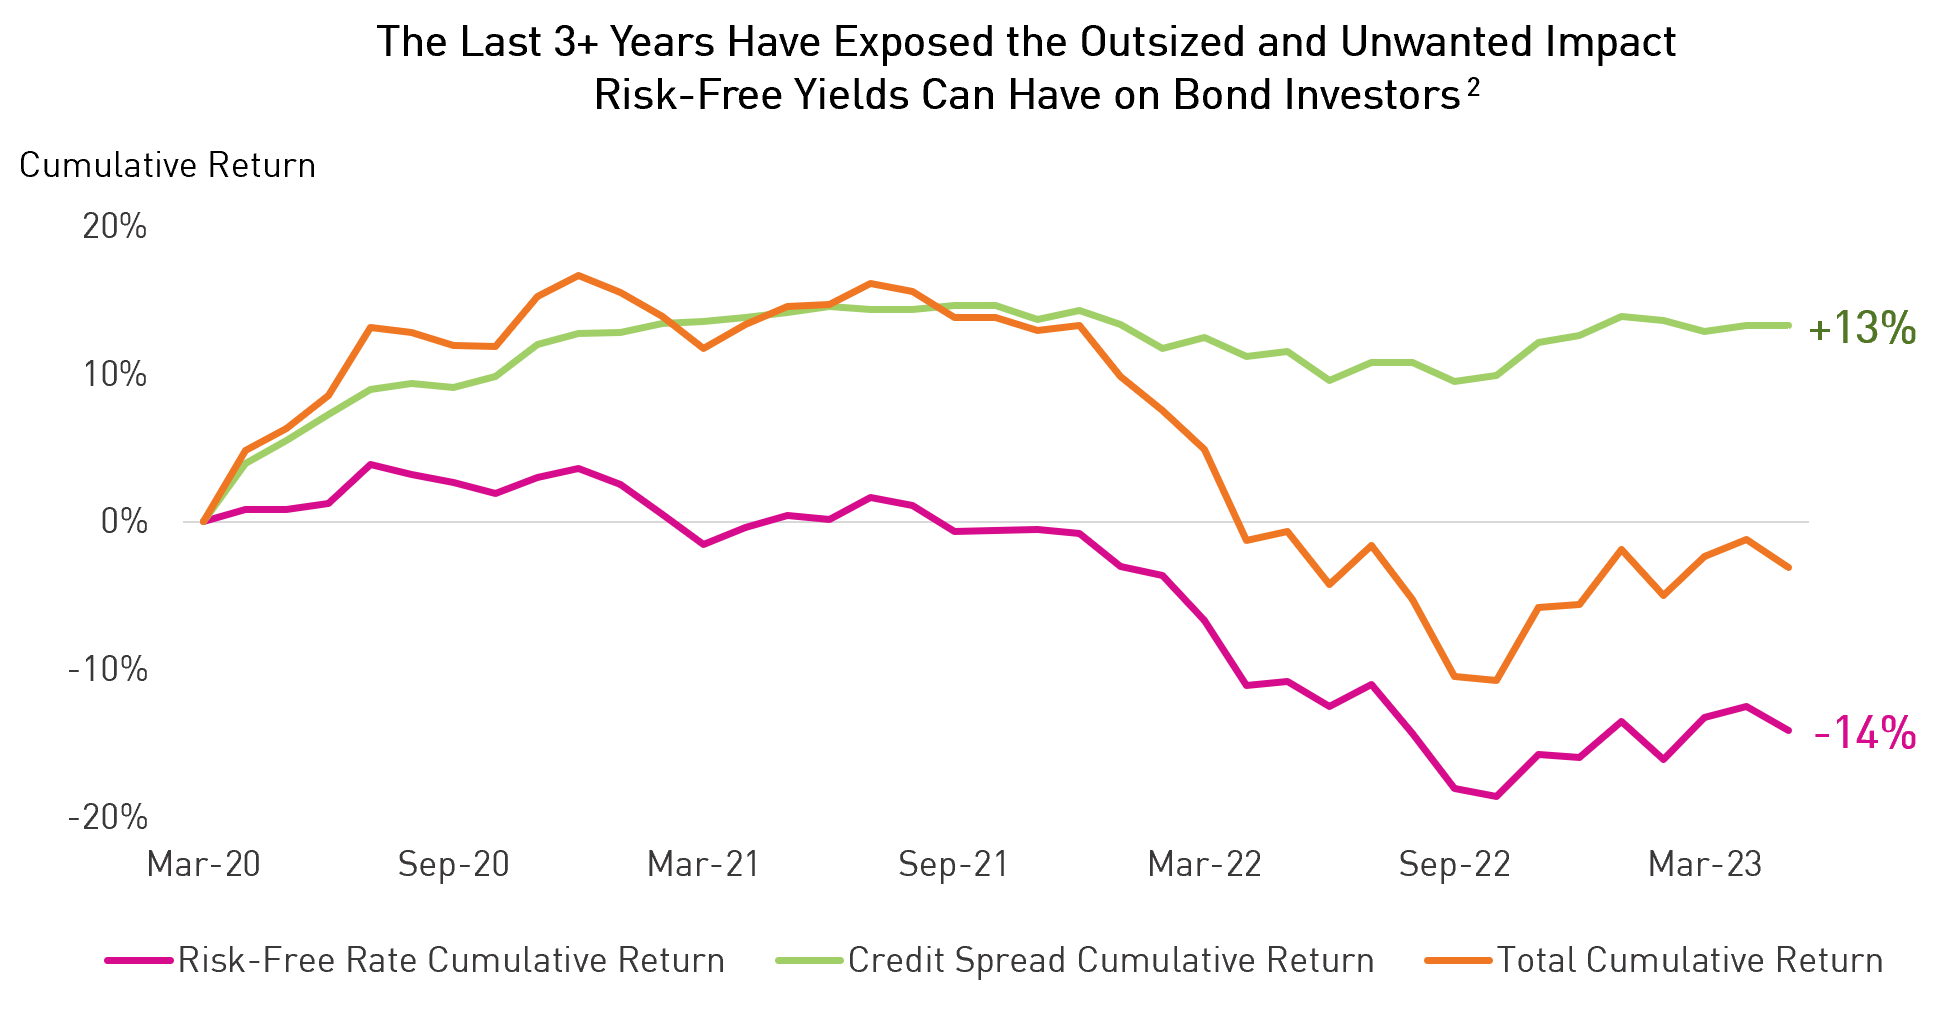 A line graph showing the last 3+ years have exposed the outsized and unwanted impact risk-free yields can have on bond investors